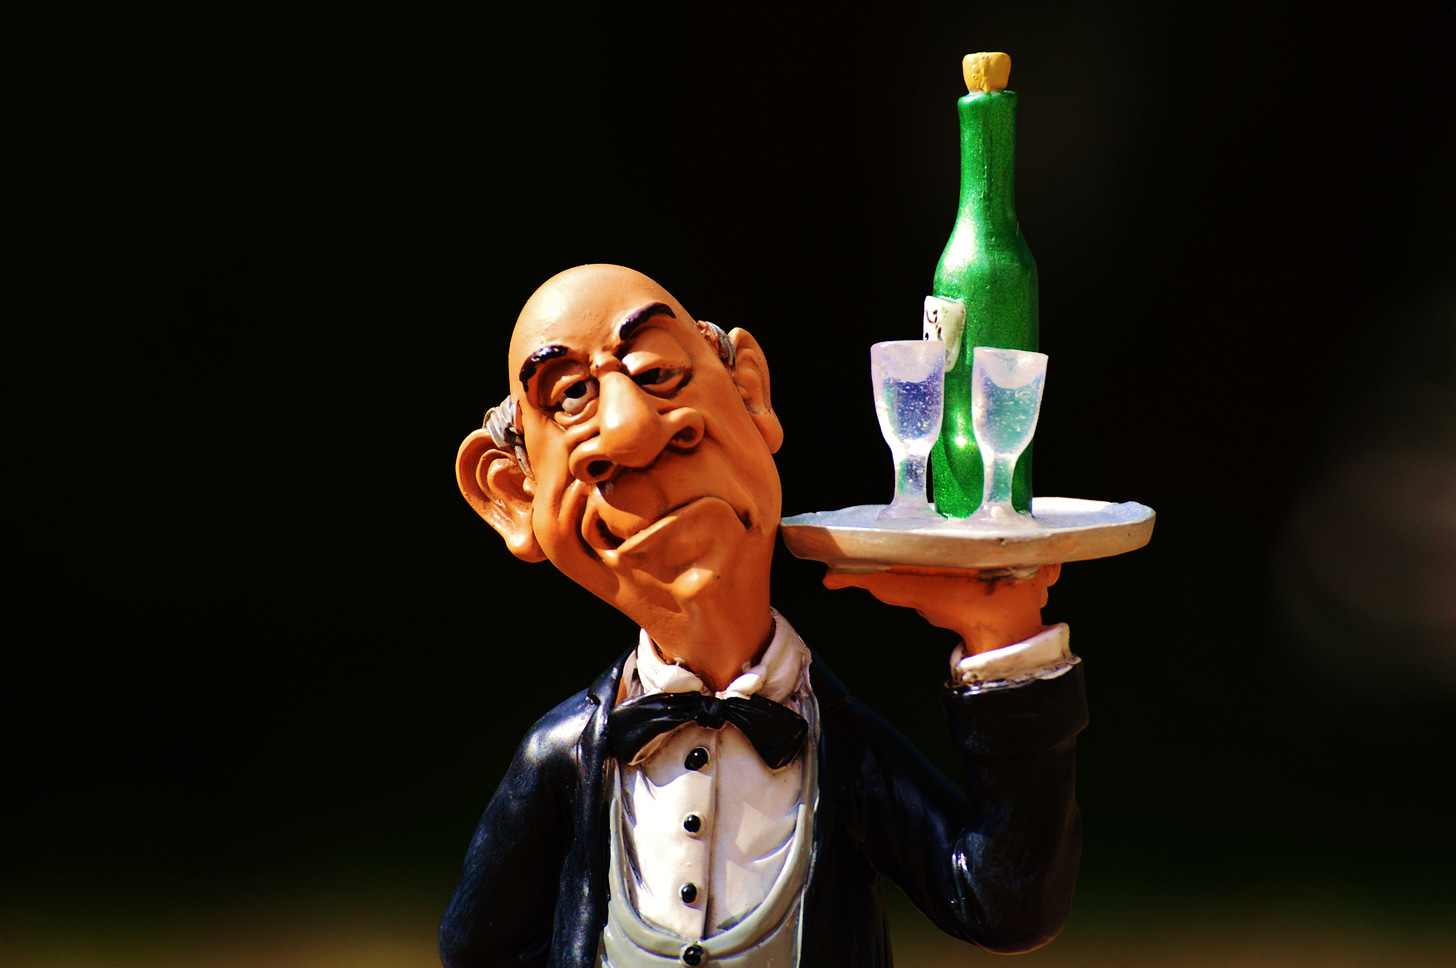 A ceramic butler sculpture with exagerated facial features that seem lopsided. He's carrying a tray of drinks.